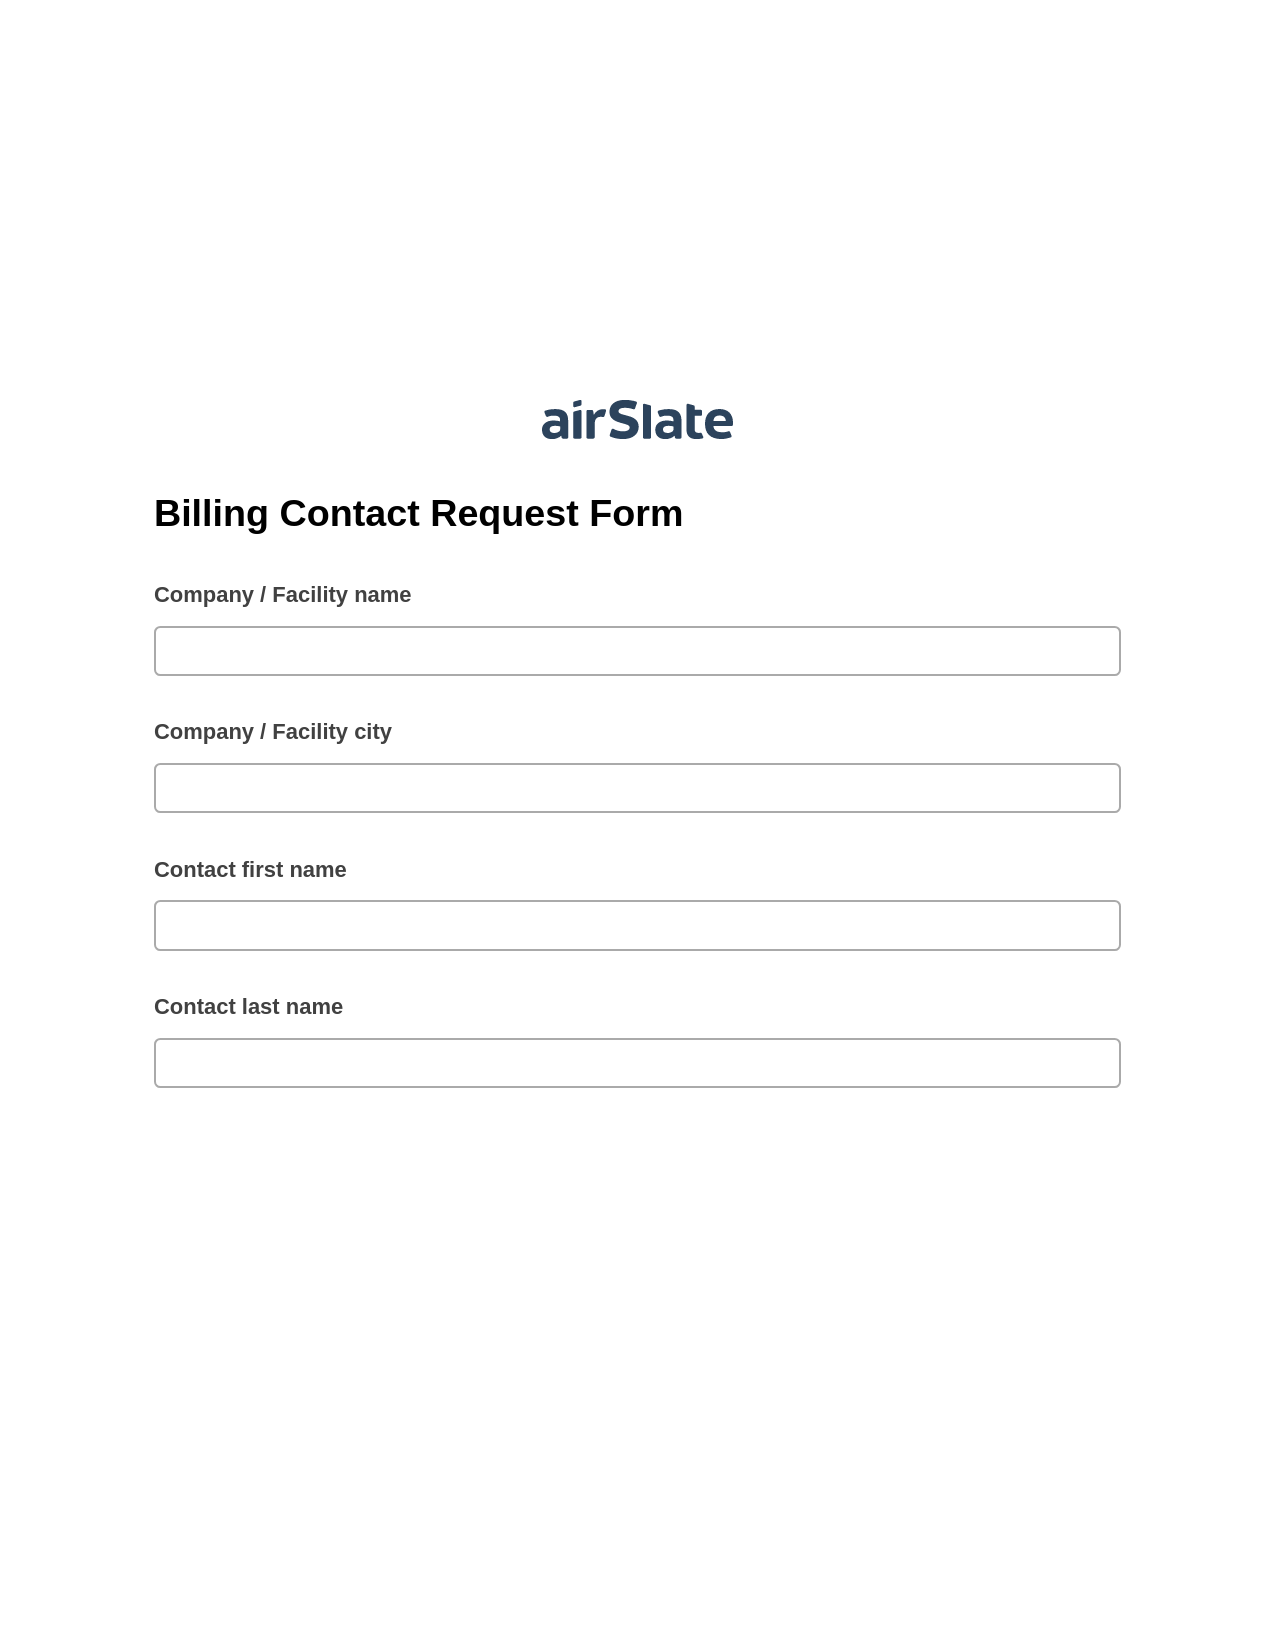 Multirole Billing Contact Request Form Pre-fill Dropdown from Airtable, Audit Trail Bot, Export to NetSuite Record Bot